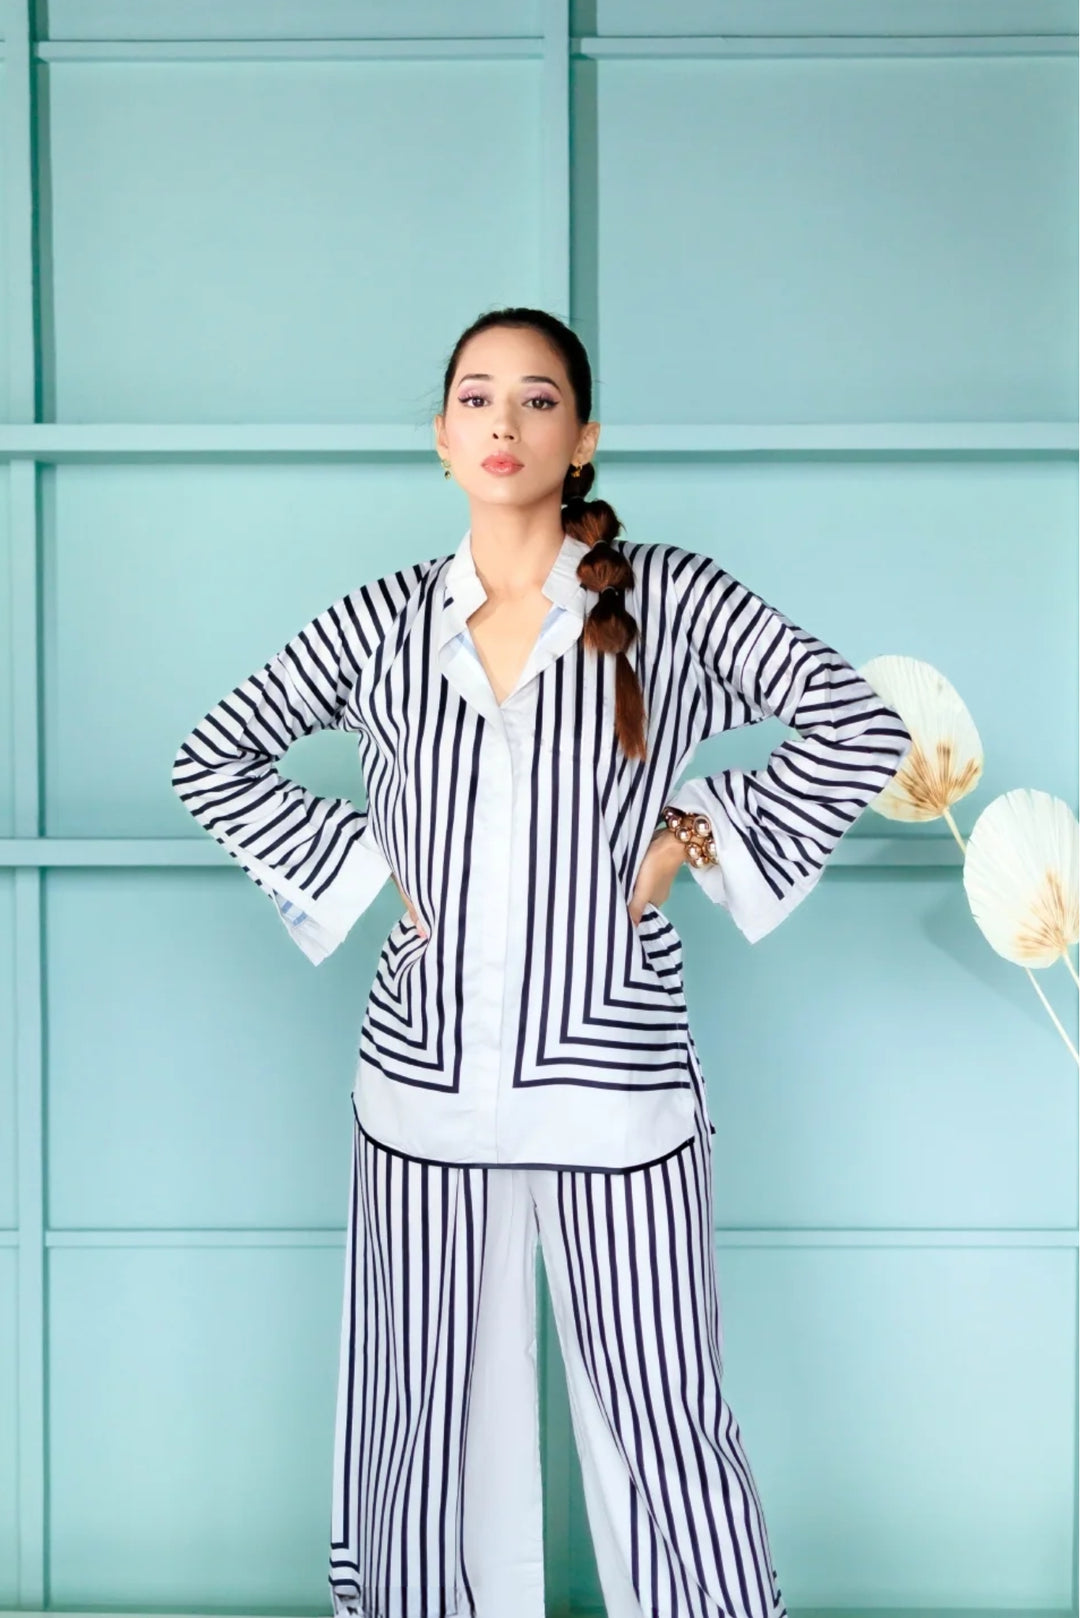 Online shopping for coordinated stripe fashion